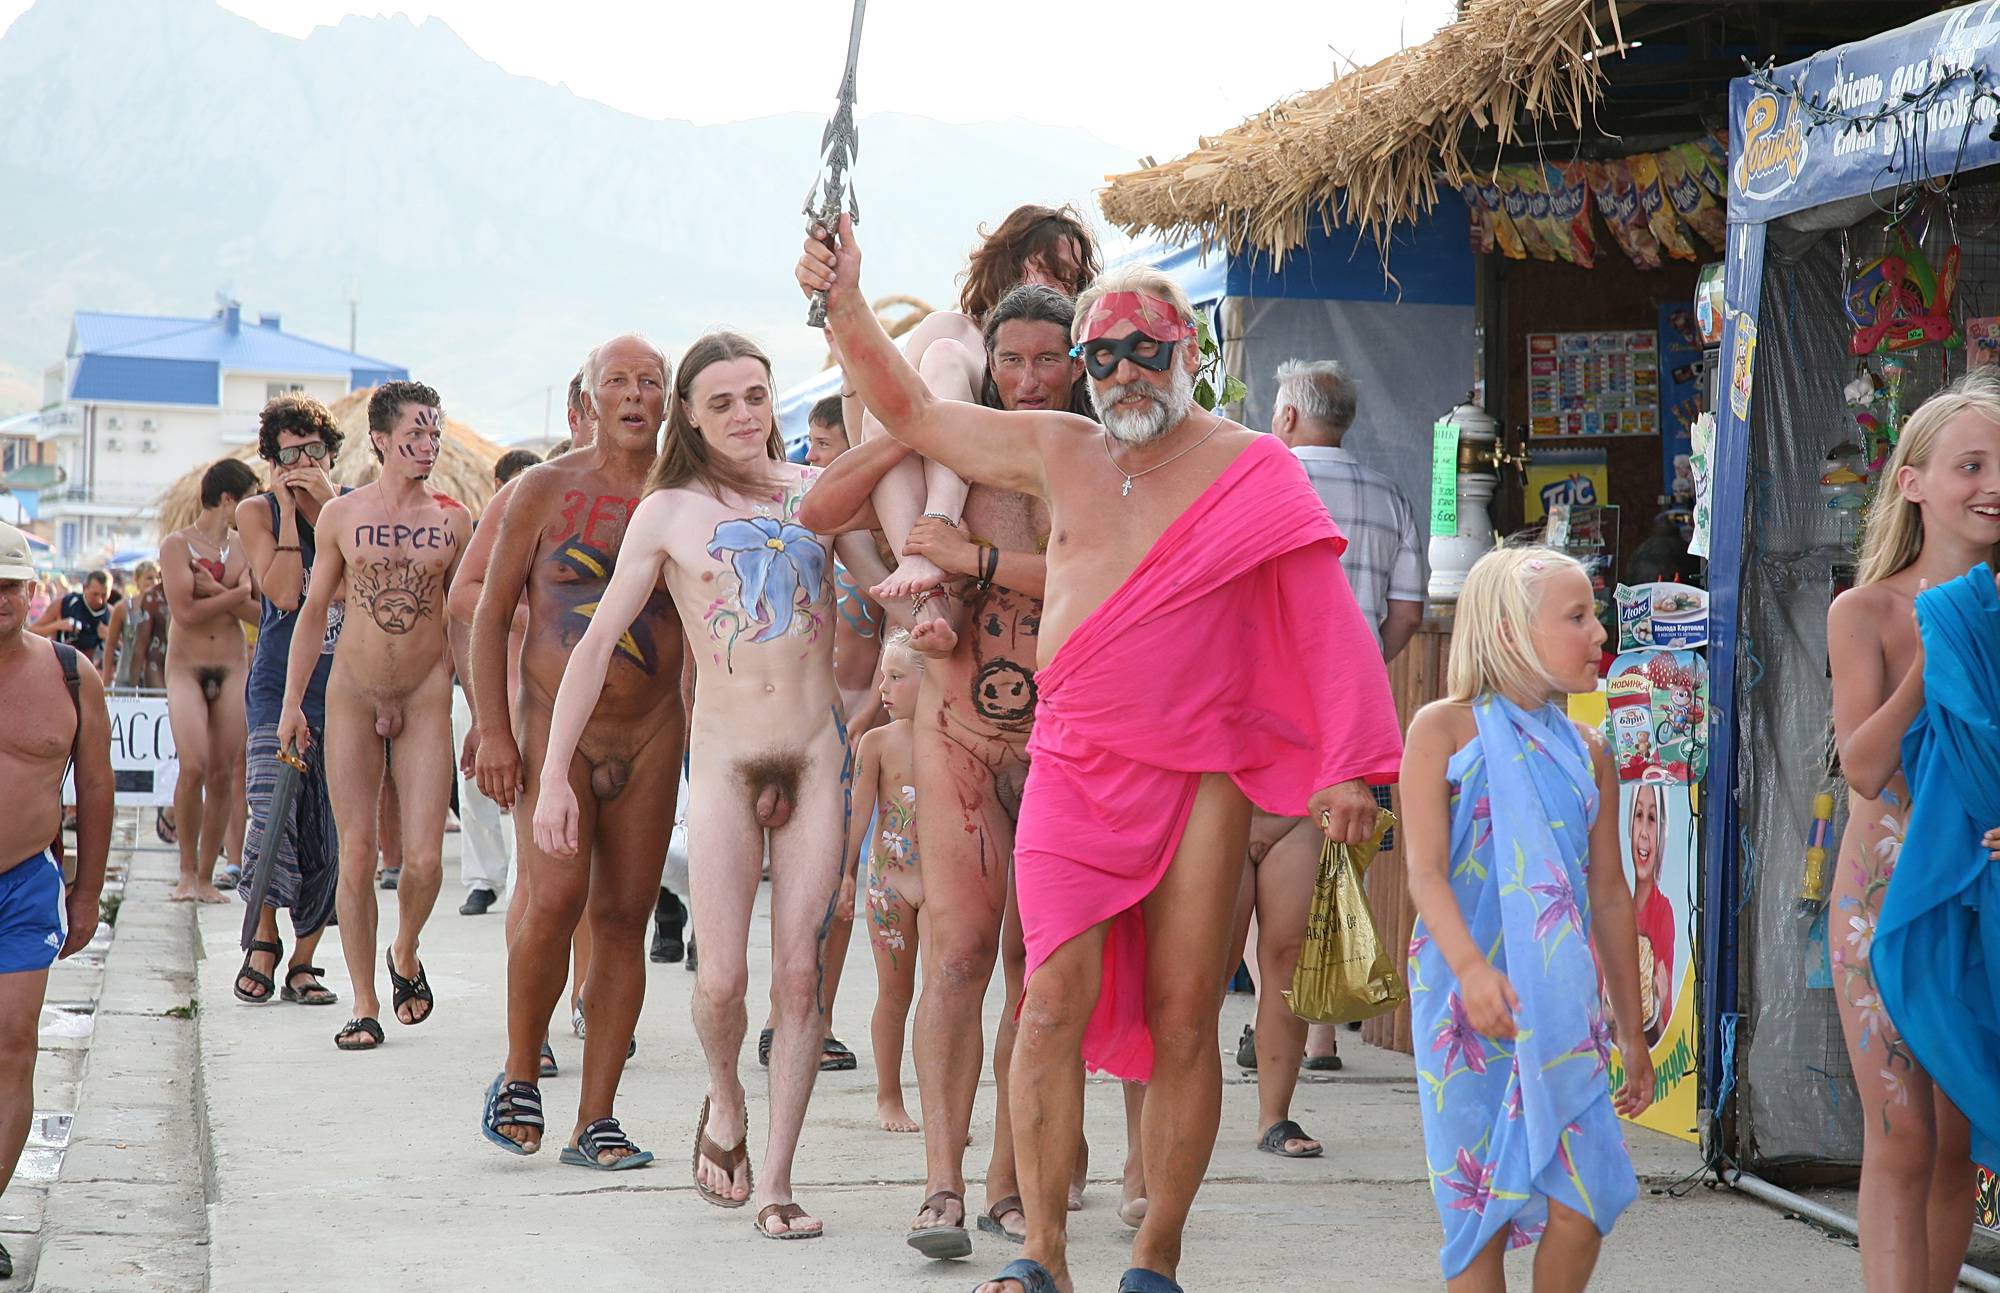 Pure Nudism Pics-Marching Down The Street - 1